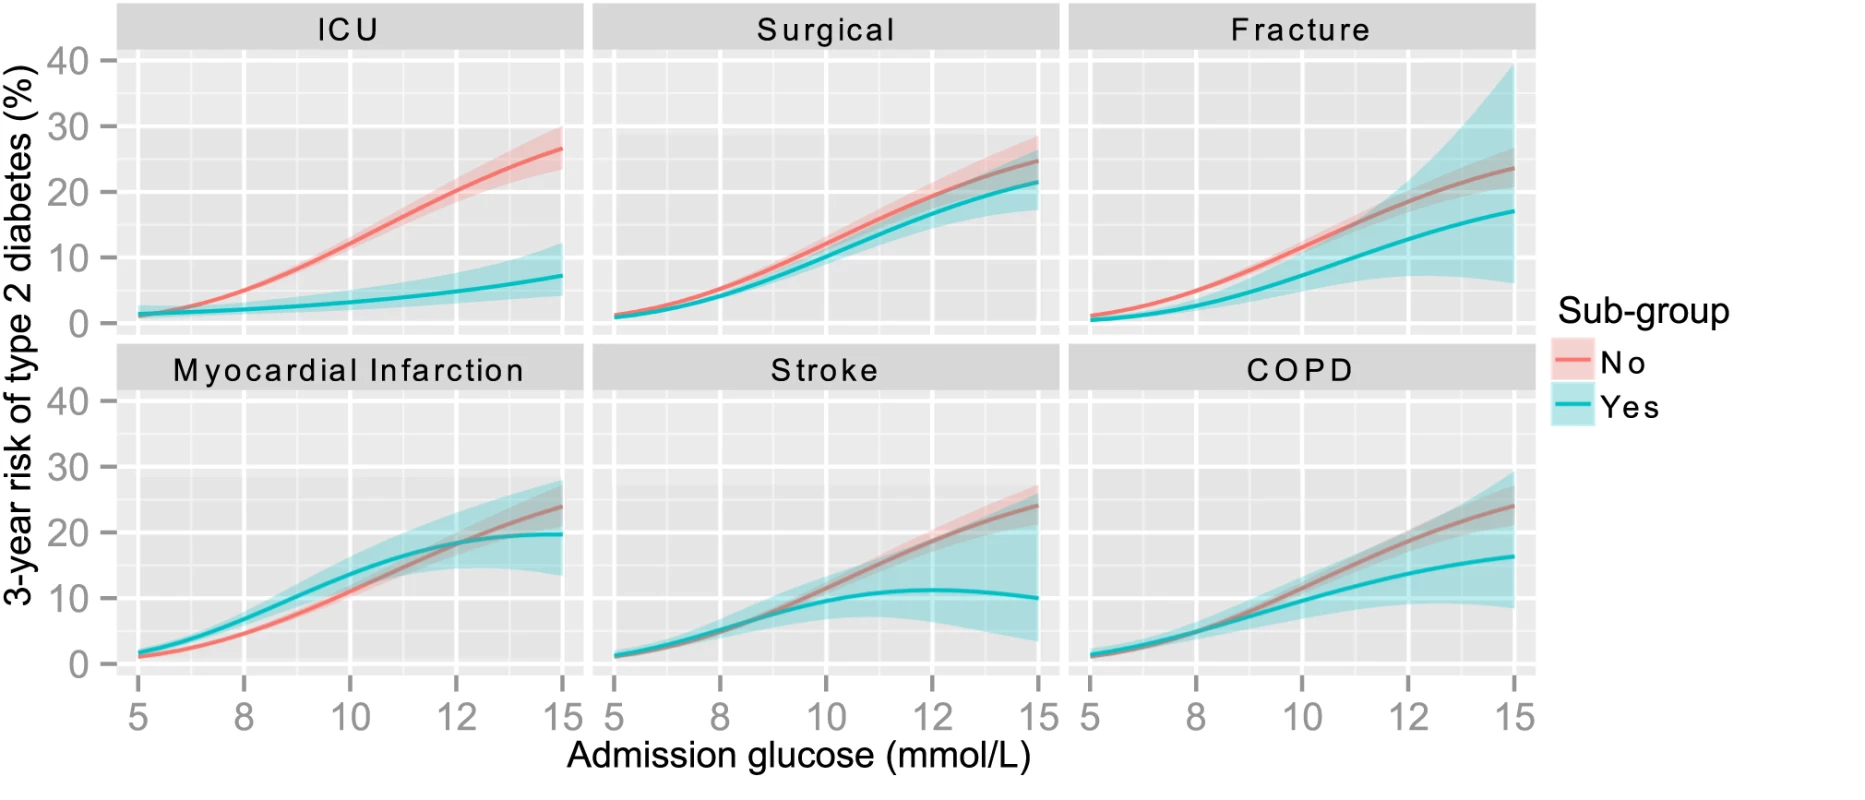 3-year risk of type 2 diabetes by glucose for patients in sub-groups.